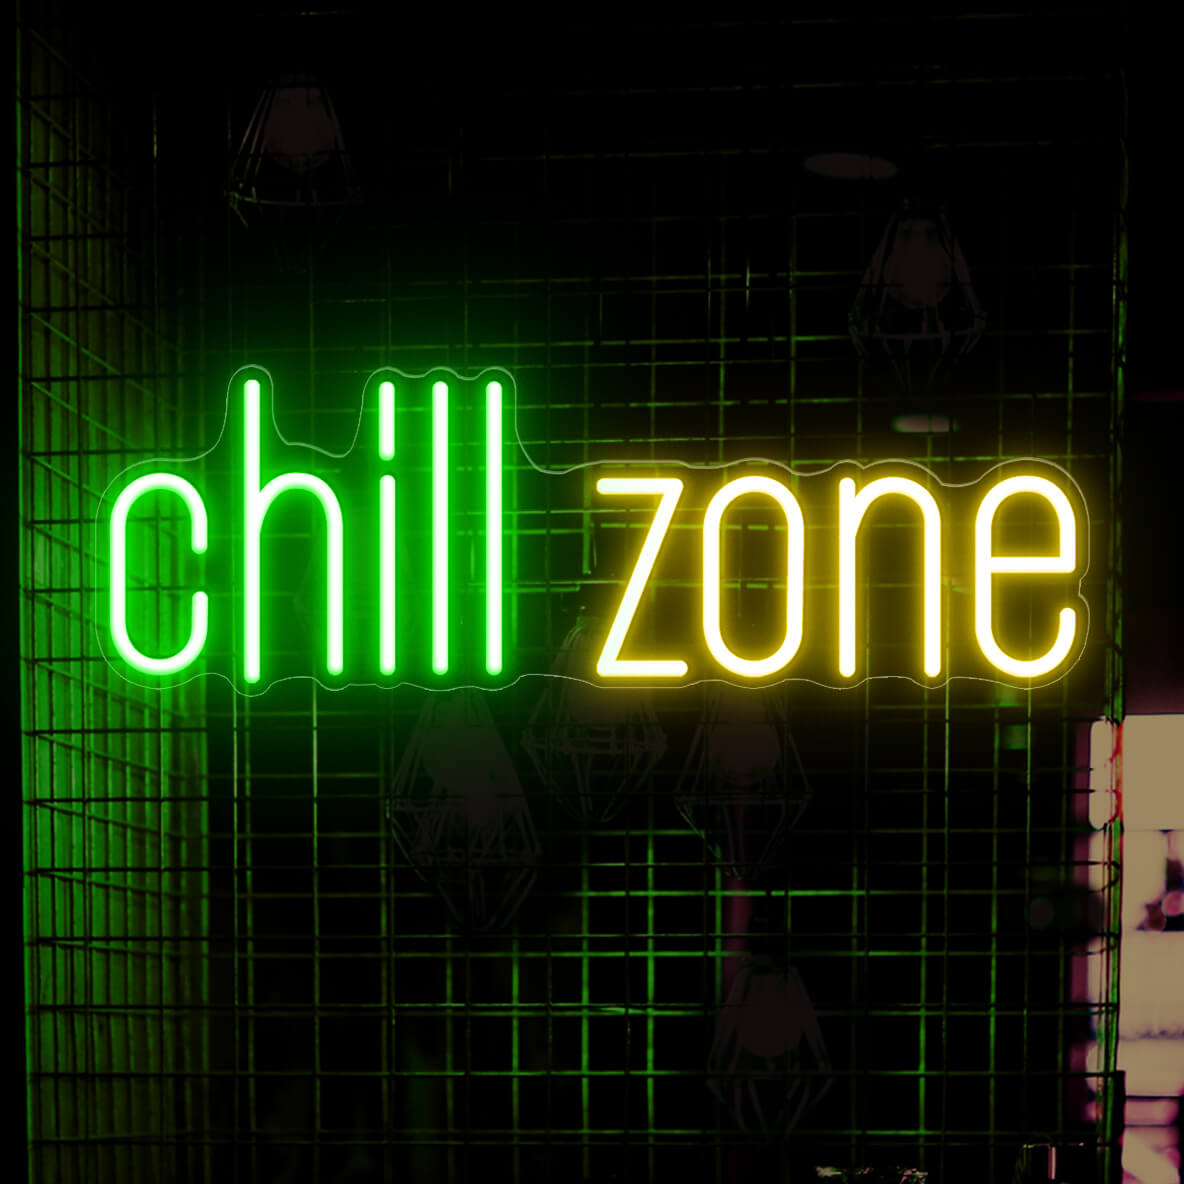 Chill Zone Neon Sign Led Chill Neon Light Sign yellow